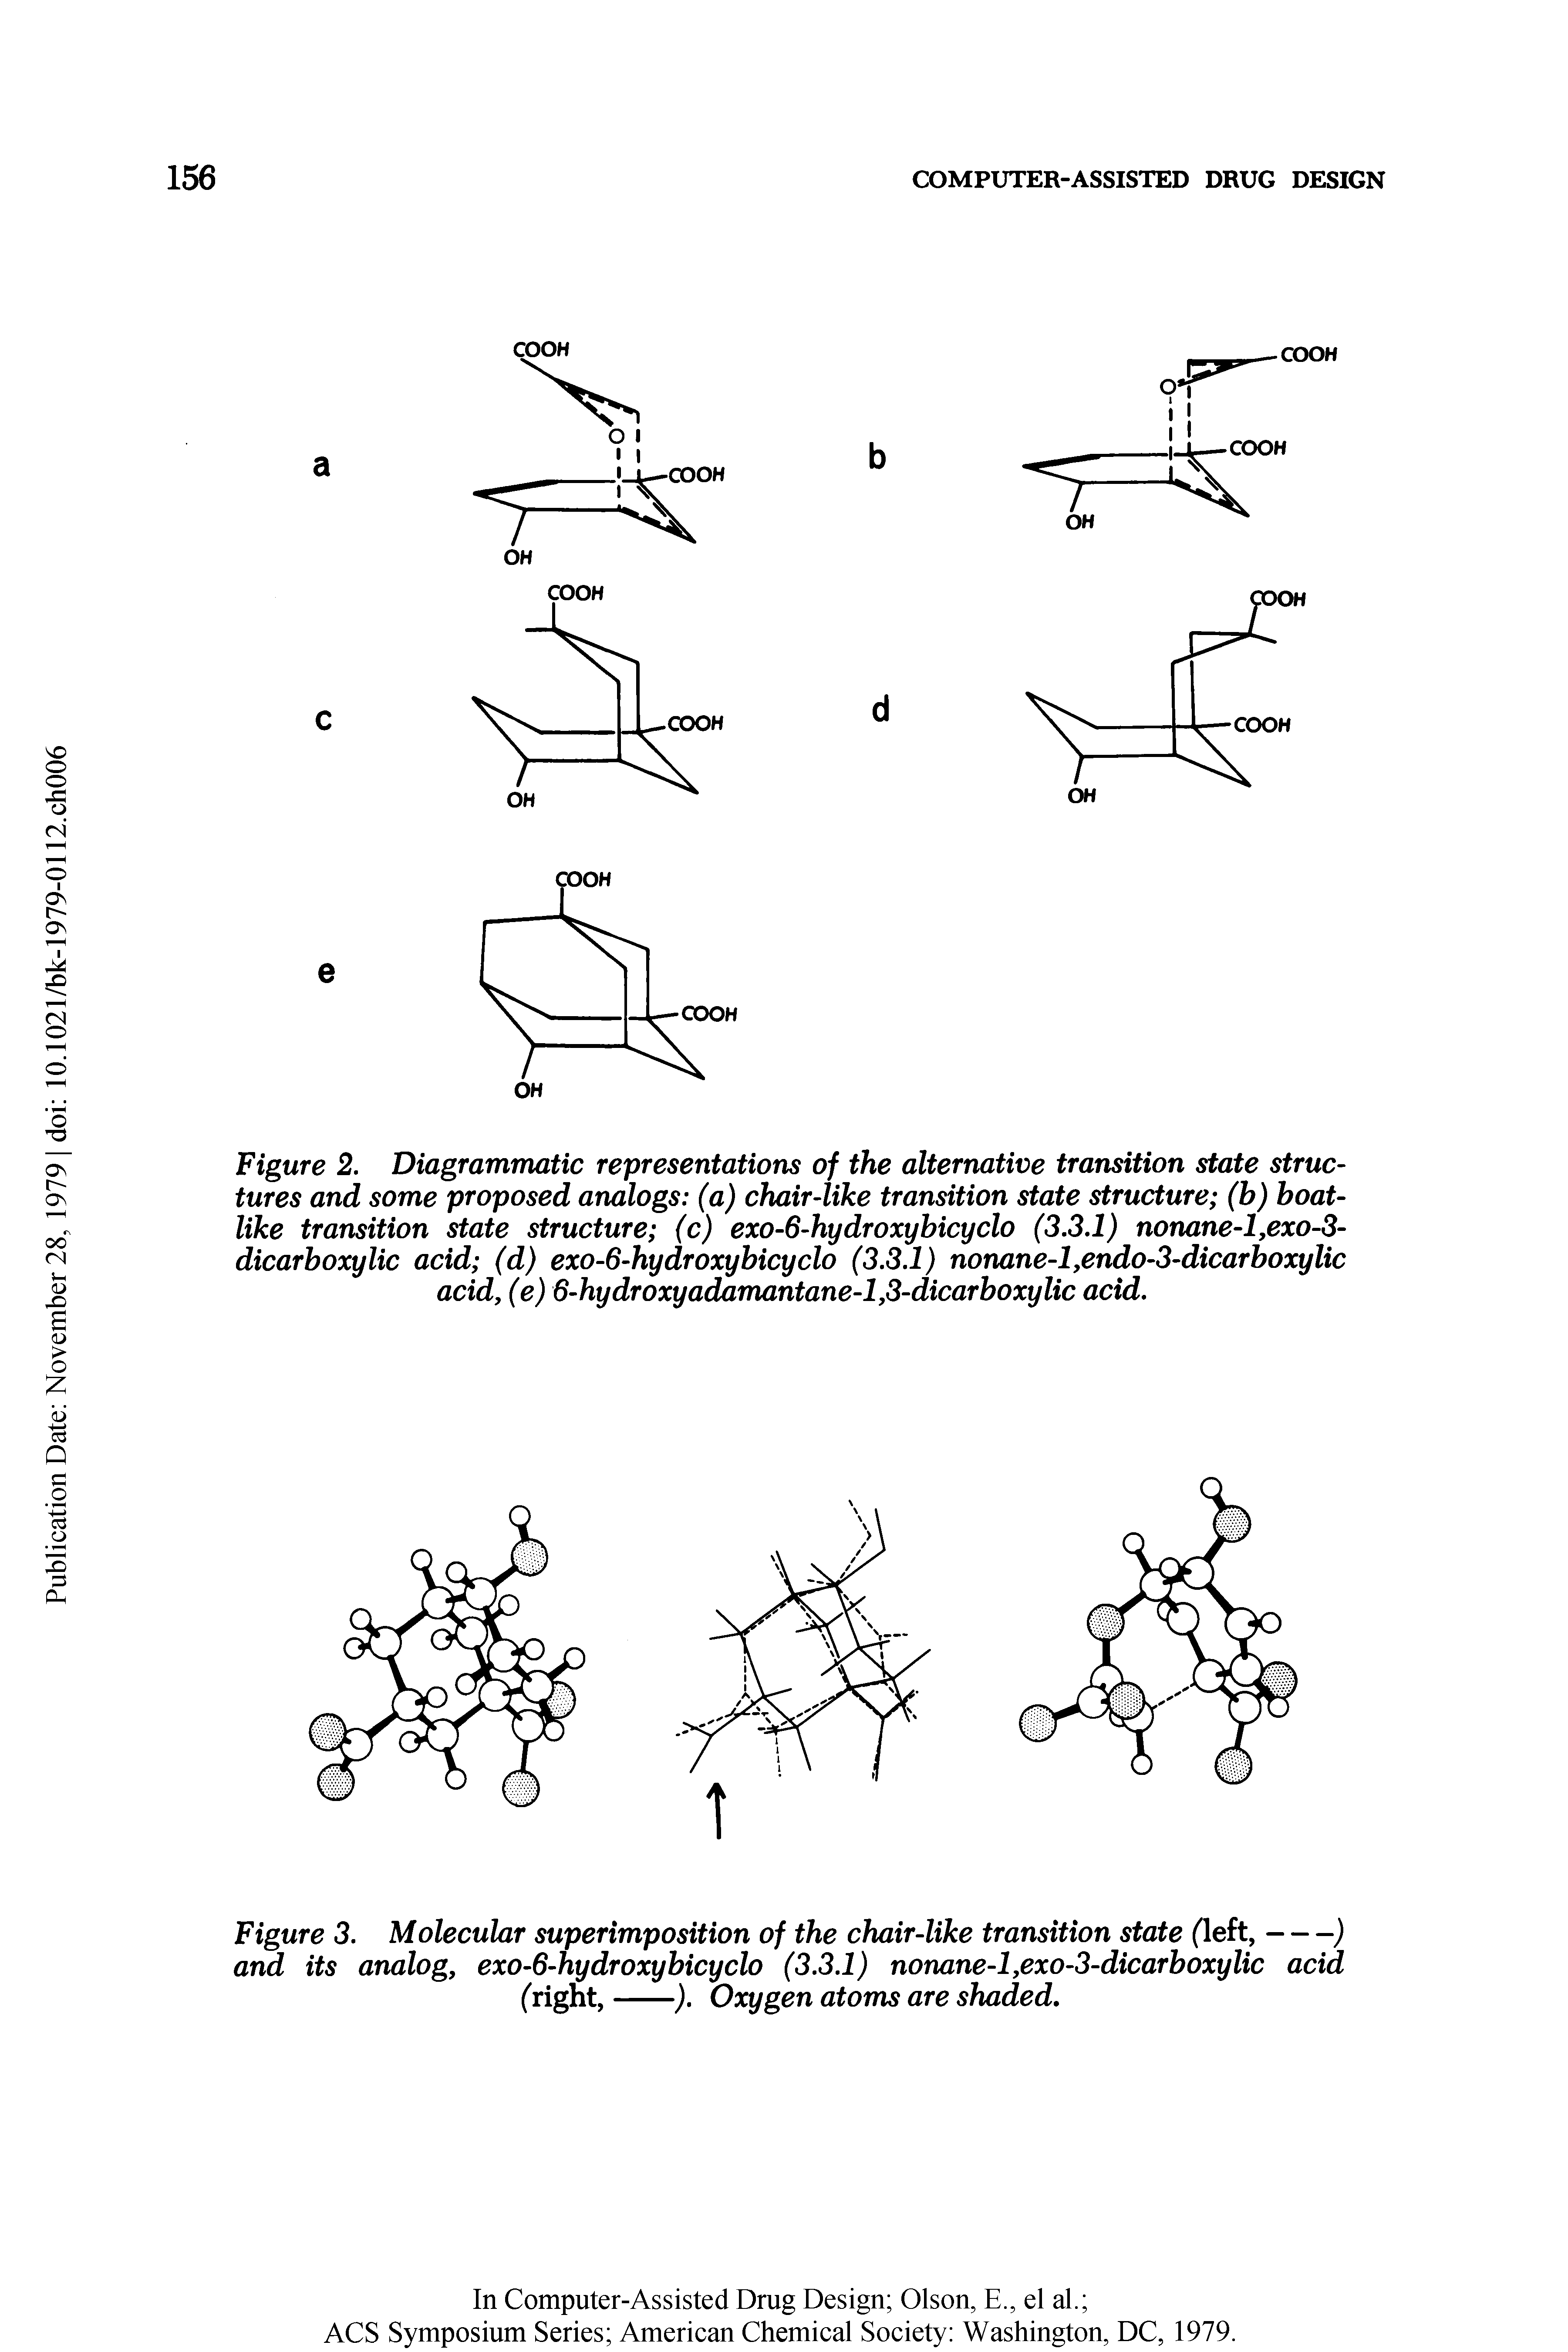 Figure 2. Diagrammatic representations of the alternative transition state structures and some proposed analogs (a) chair-like transition state structure (b) boatlike transition state structure (c) exo-6-hydroxybicyclo (3.3.1) nonane-1,exo-3-dicarboxylic acid (d) exo-6-hydroxybicyclo (3.3.1) nonane-1,endo-3-dicarboxylic acid, (e) 6-hydroxyadamantane-l,3-dicarboxylic acid.